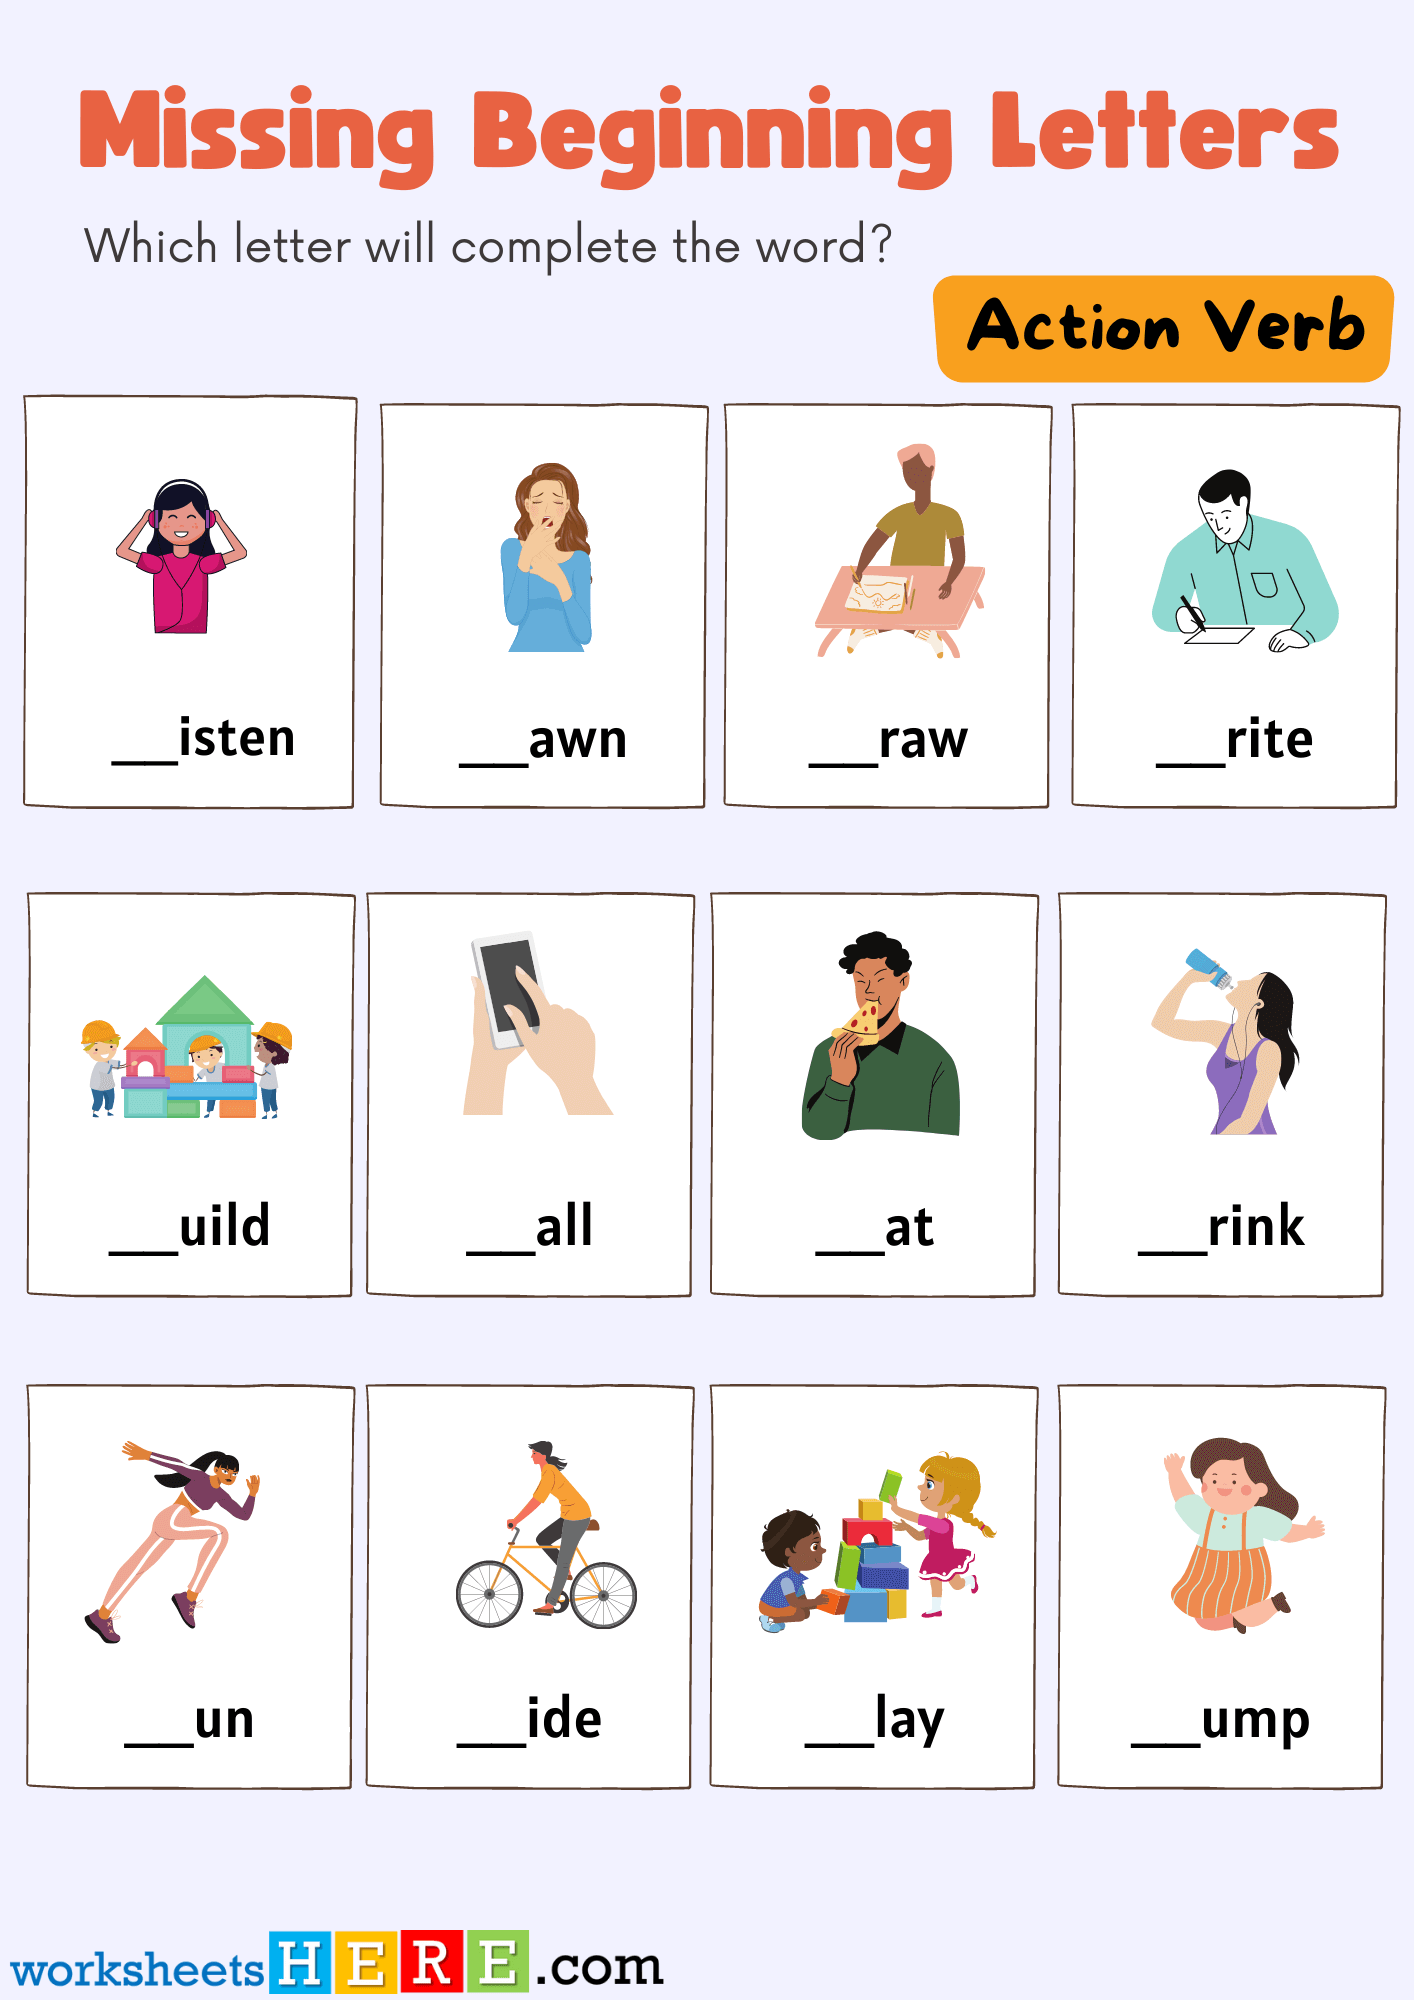 Missing Beginning Letters Activity with Action Verbs, Free Kids Pdf Worksheets